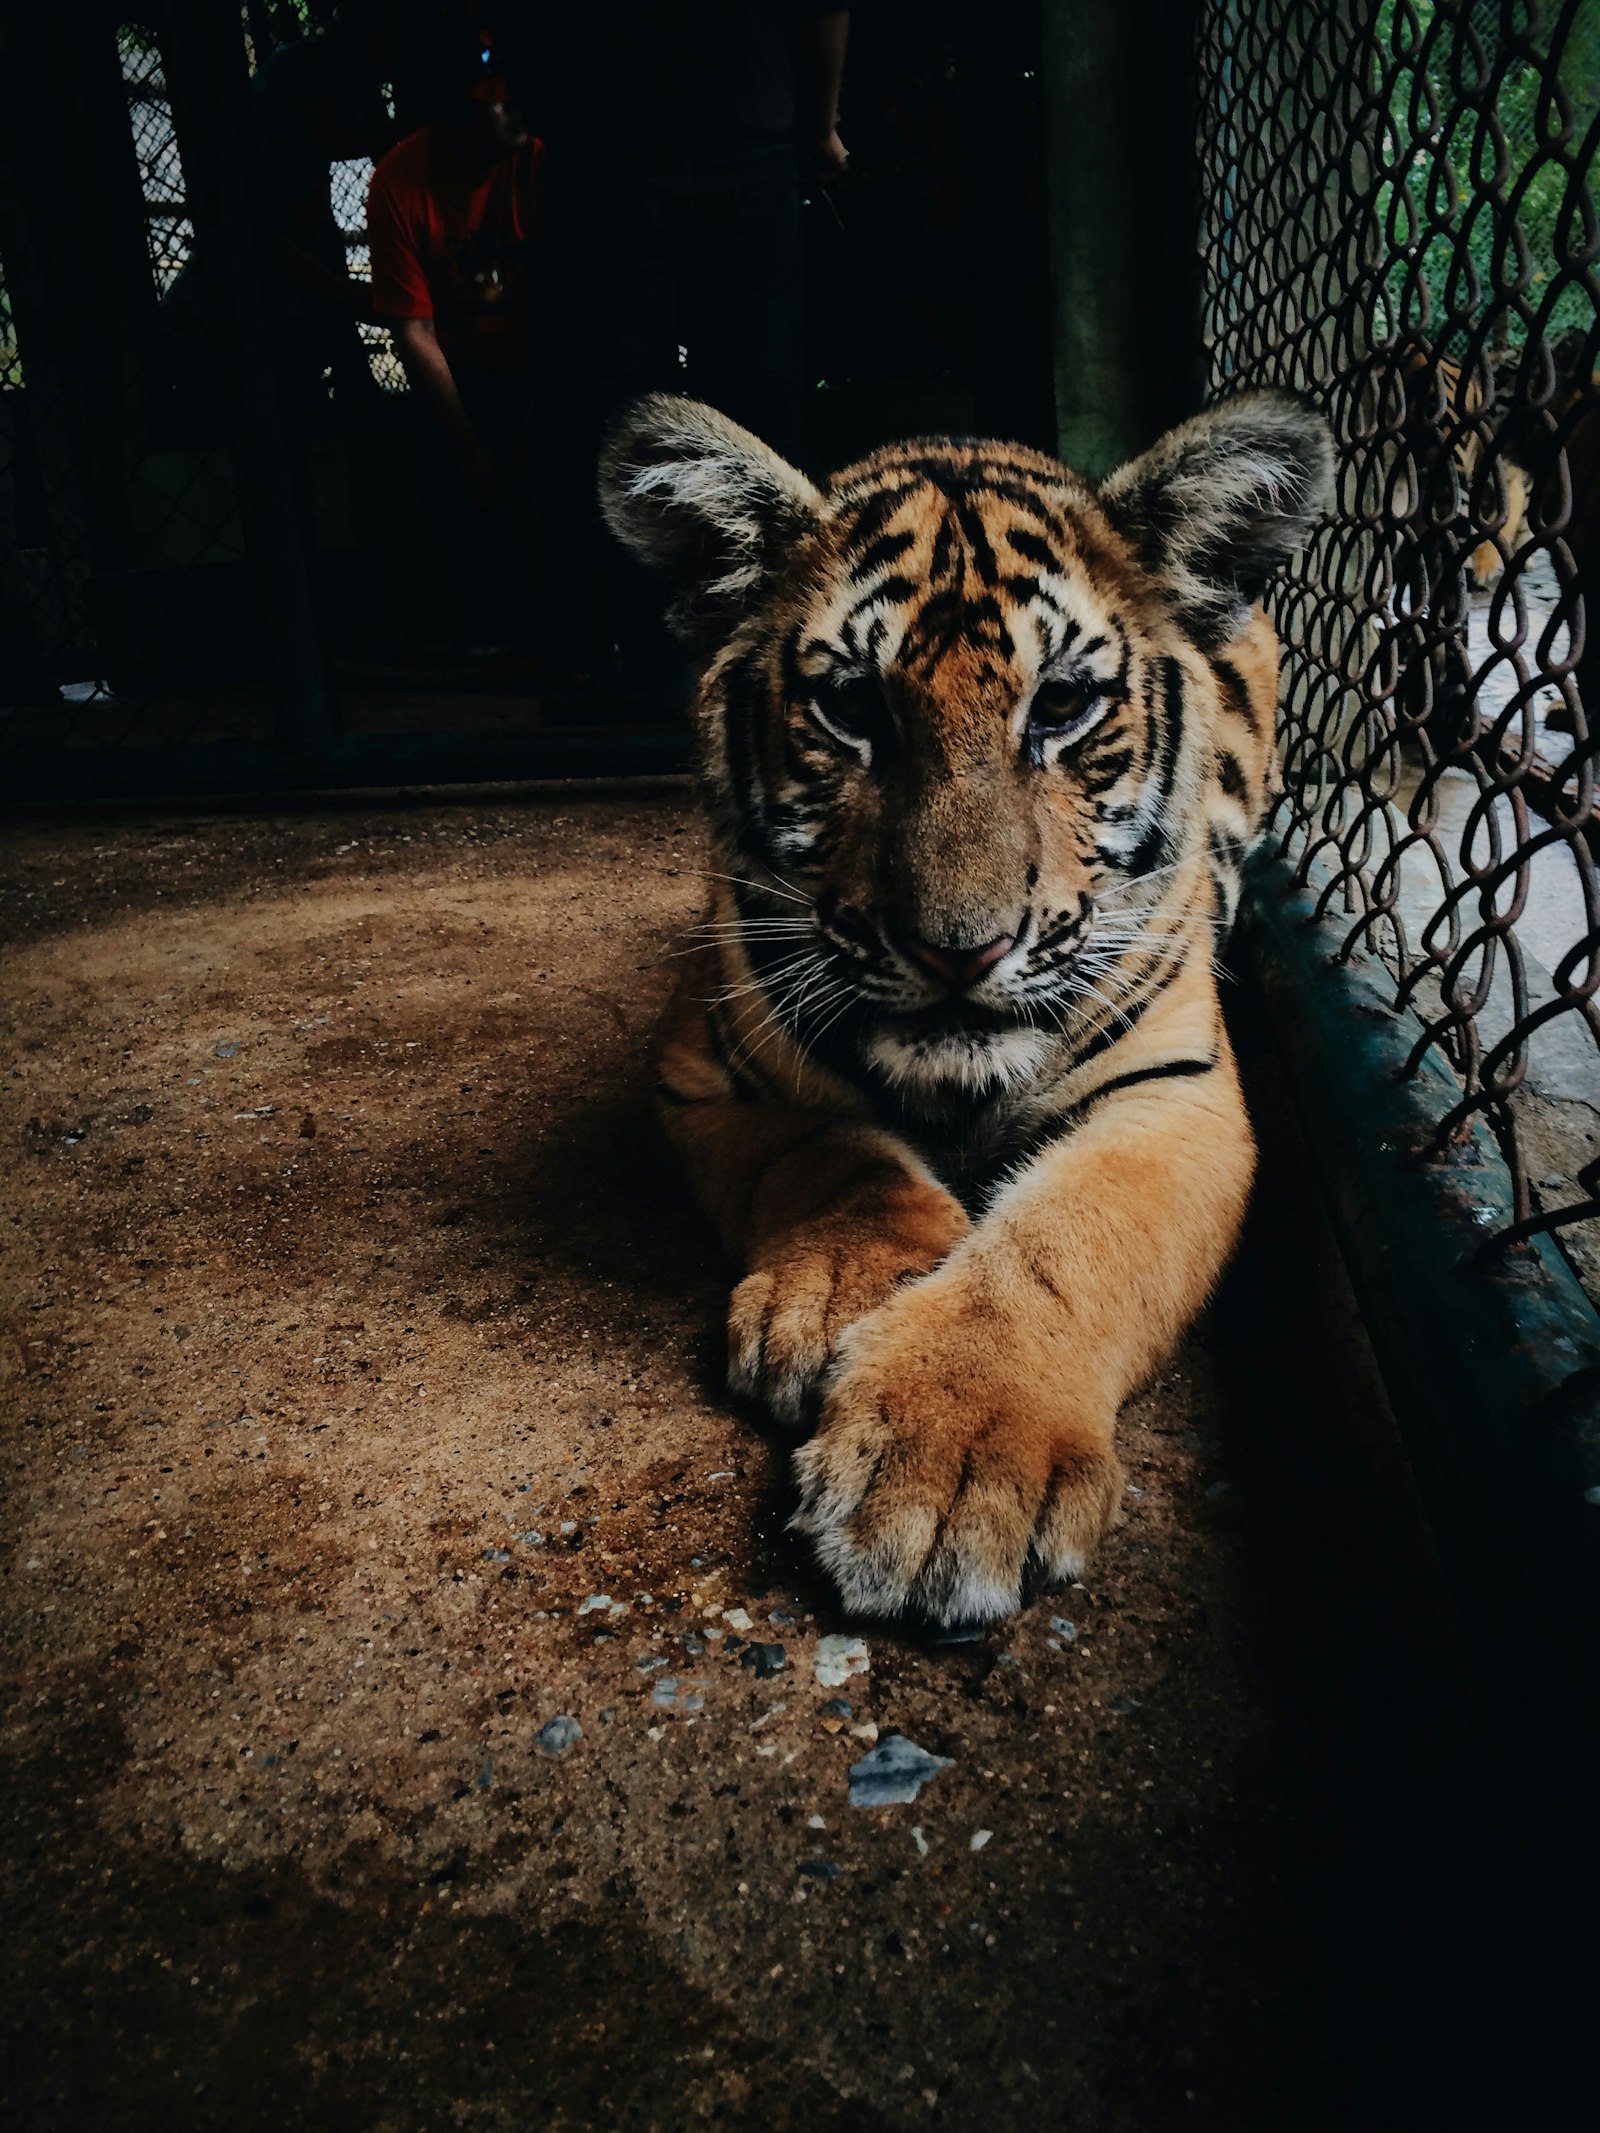 Apple iPhone 5s sample photo. Tiger beside cage photography